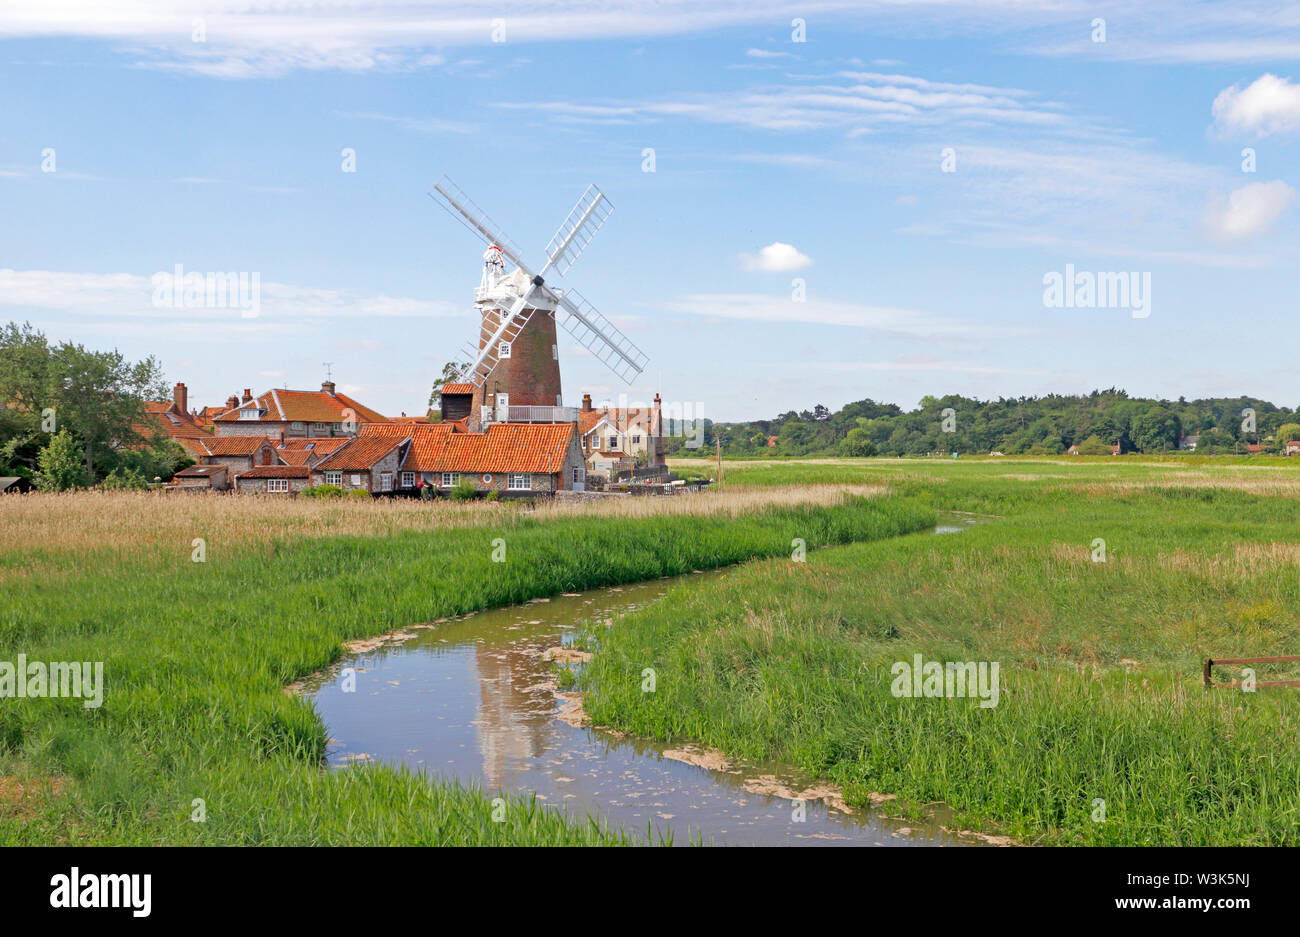 A view of Cley Windmill with the River Glaven flowing through reed beds on the North Norfolk coast at Cley-next-the-Sea, Norfolk, England, UK, Europe. Stock Photo